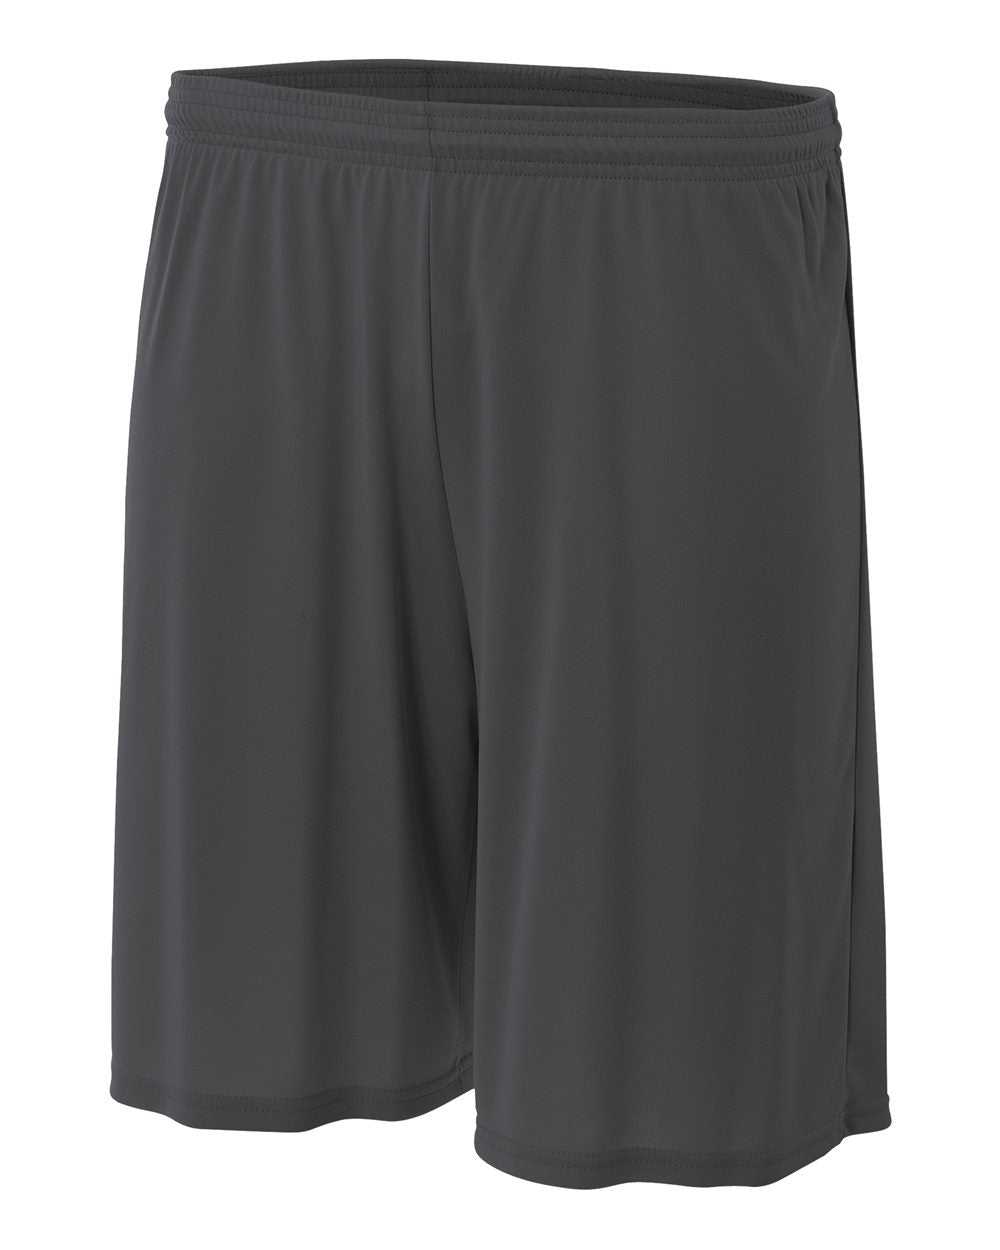 A4 N5283 9" Cooling Performance Short - Graphite - HIT a Double